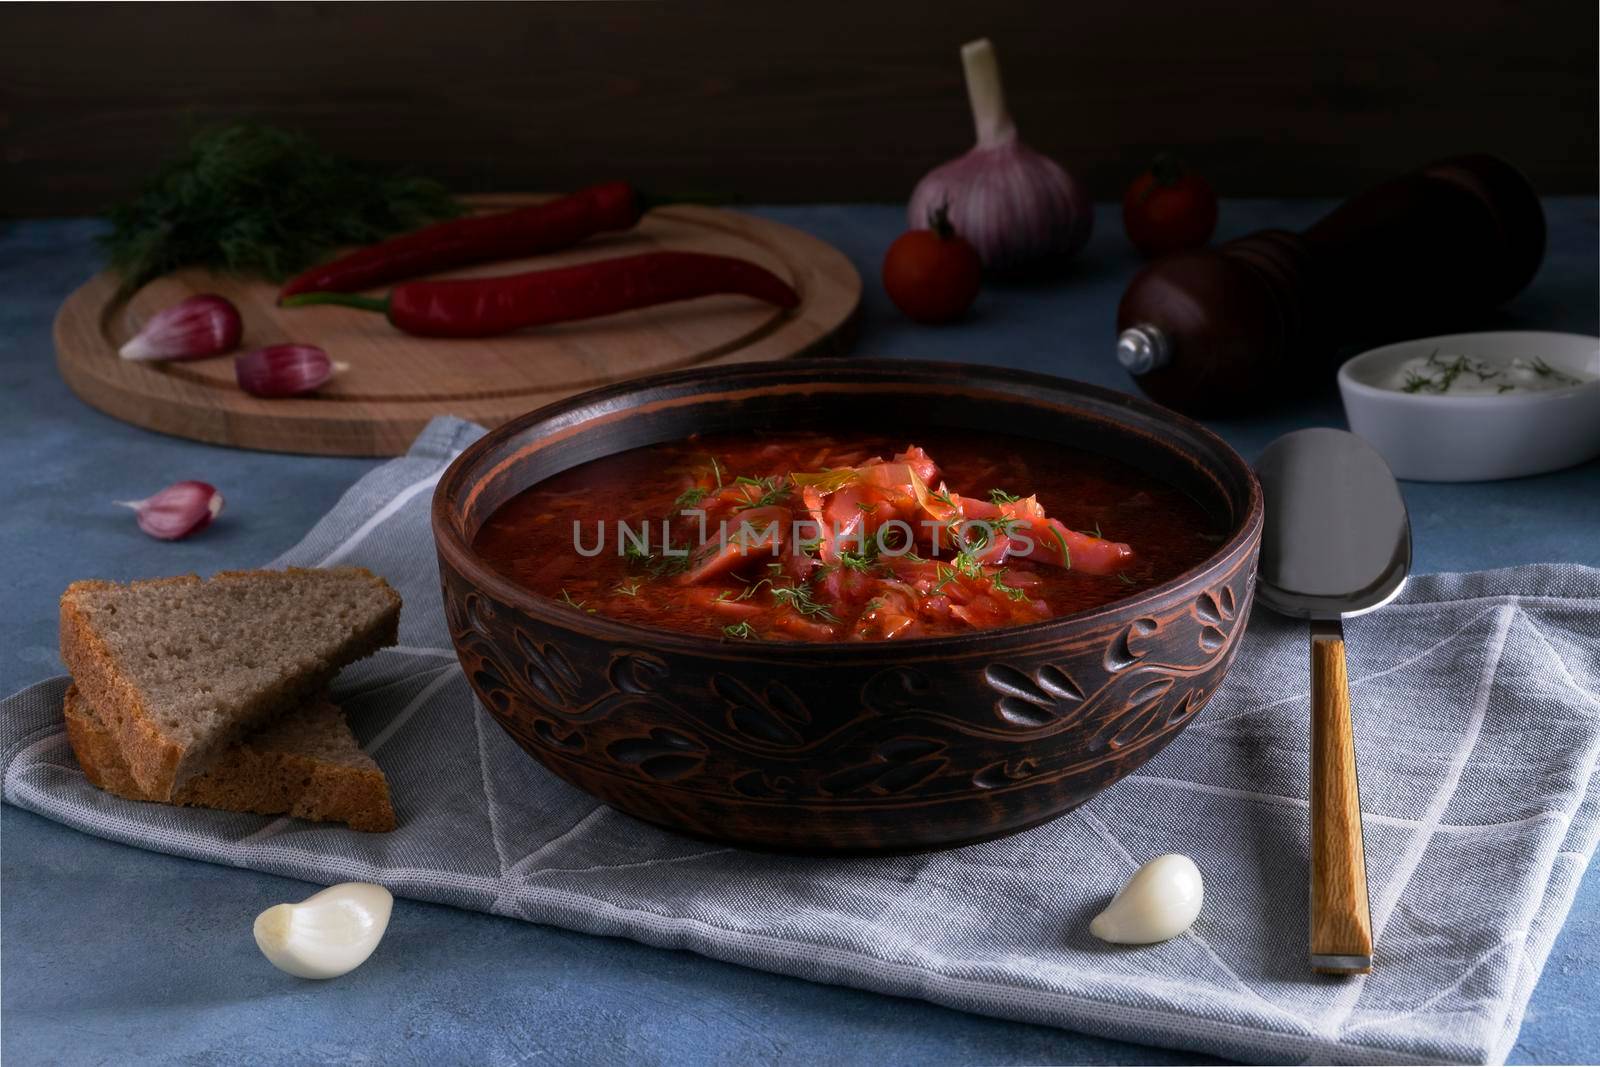 Close-up of the traditional Russian soup borscht made from cabbage, beets and other vegetables served in a clay ceramic plate with sour cream and garlic. National cuisine concept. Selective focus.